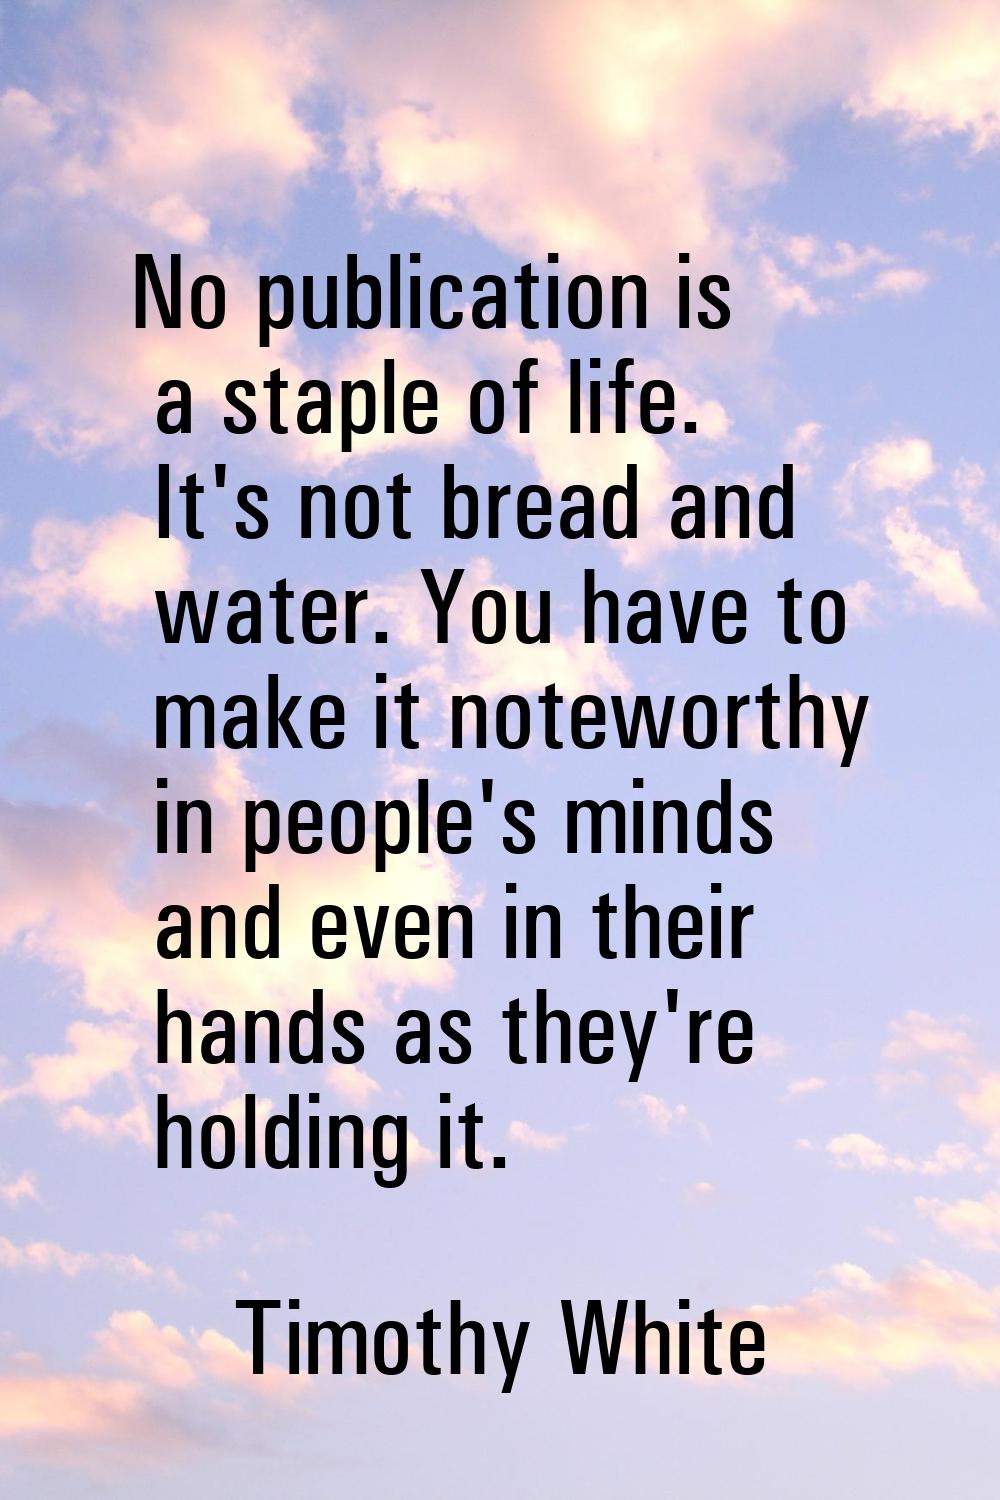 No publication is a staple of life. It's not bread and water. You have to make it noteworthy in peo